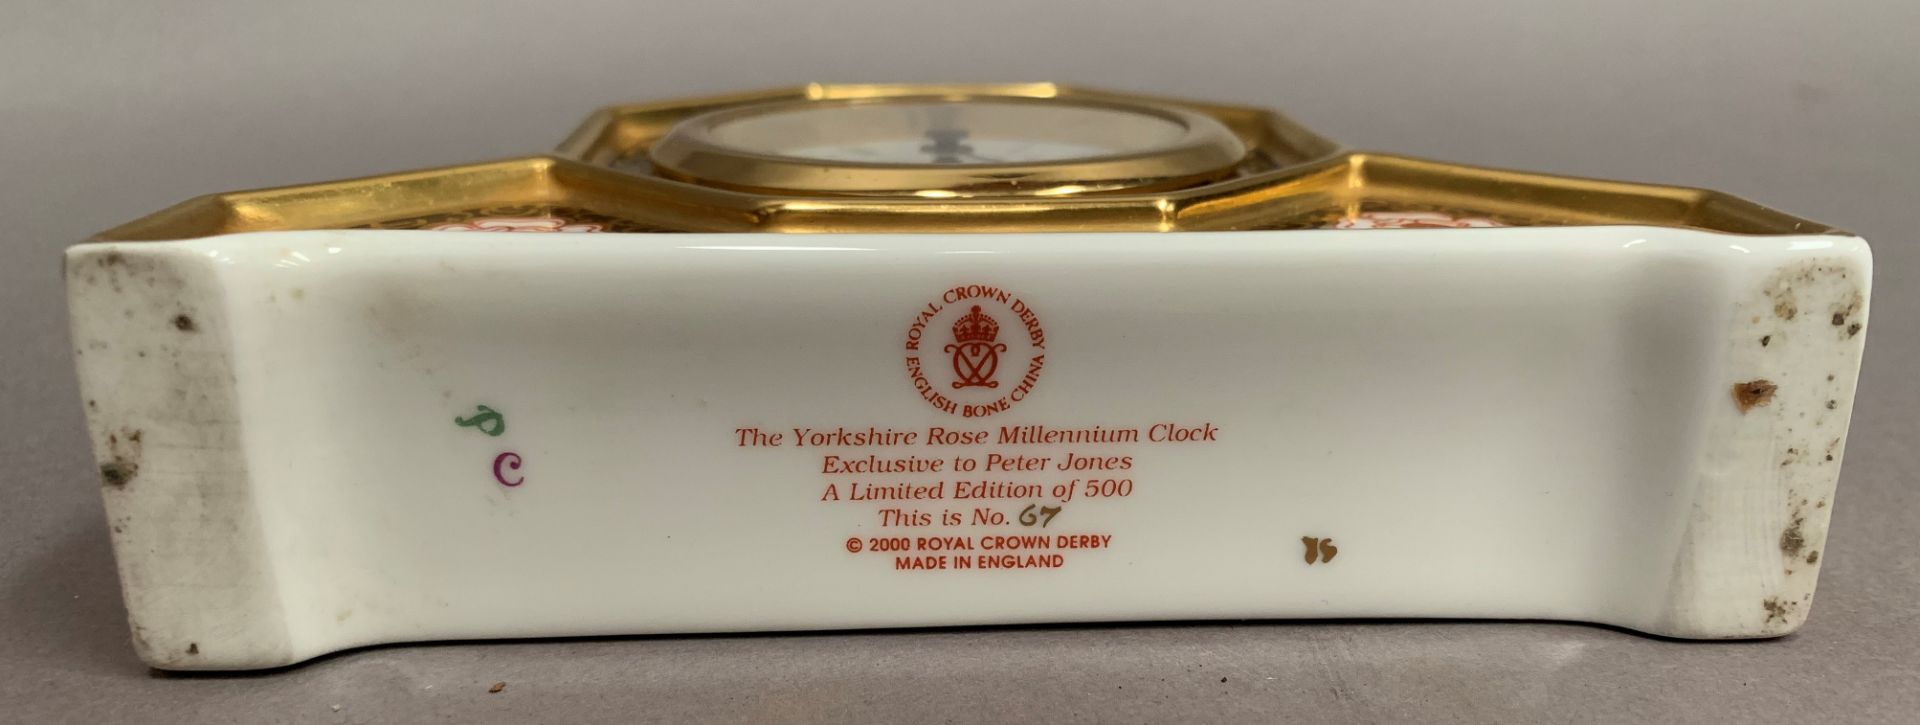 Royal Crown Derby 'The Yorkshire Millennium Clock' exclusive to Peter Jones, limited edition, - Image 3 of 3